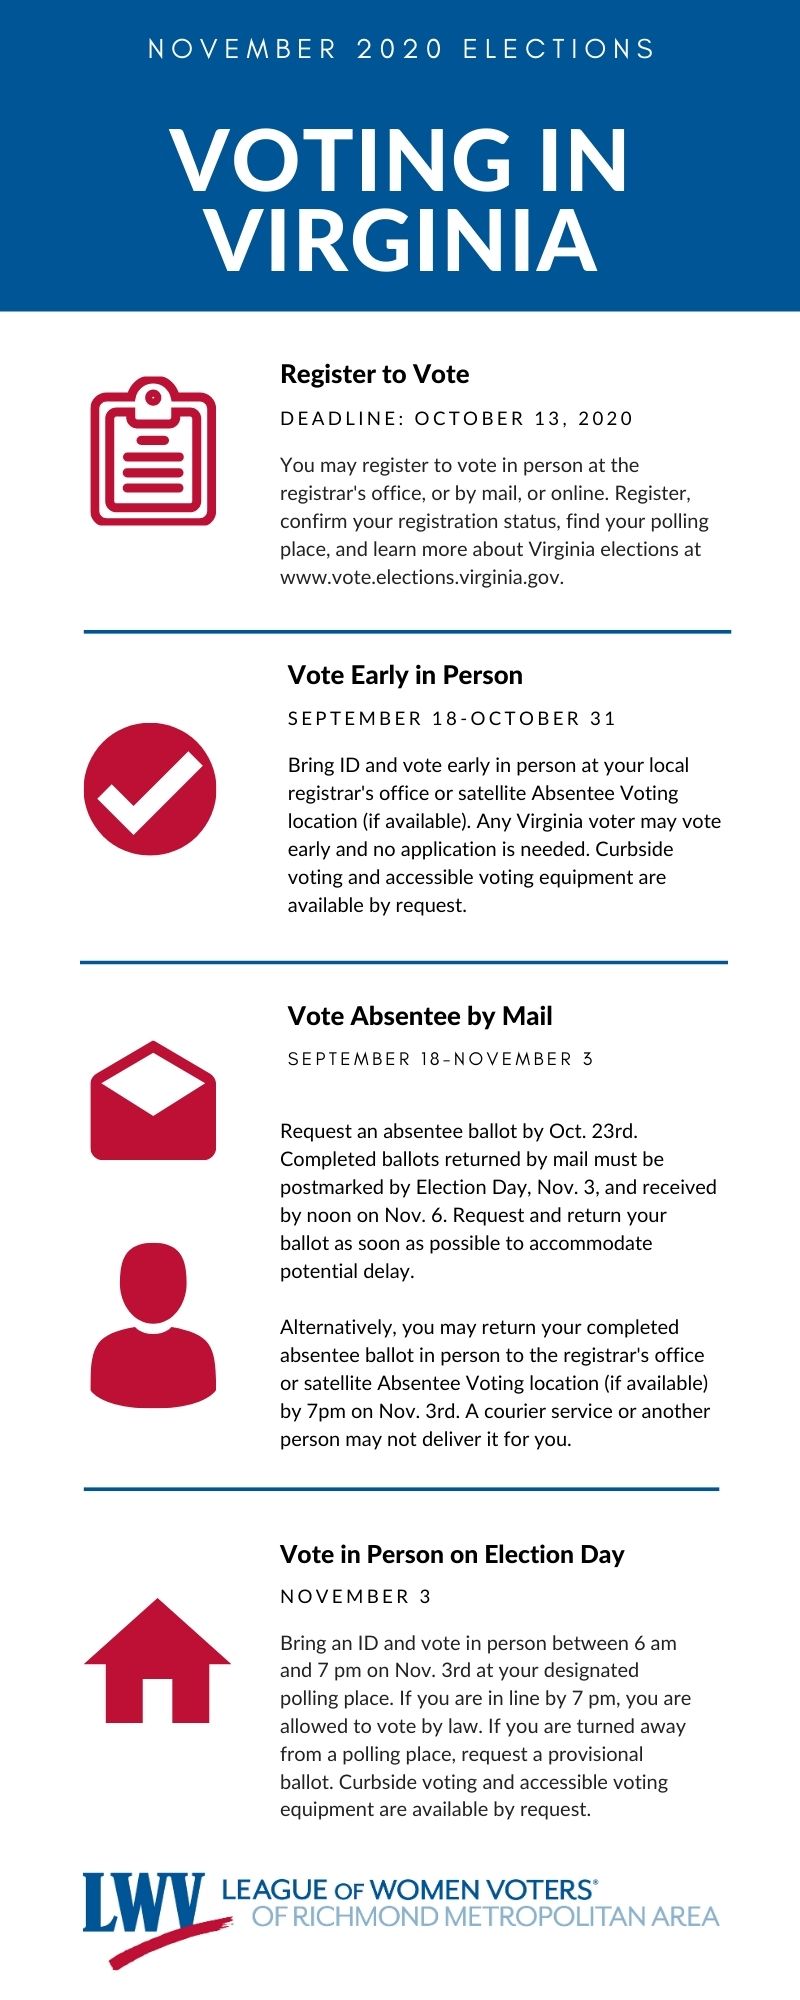 2020 Early Voting in the Richmond Metro Area